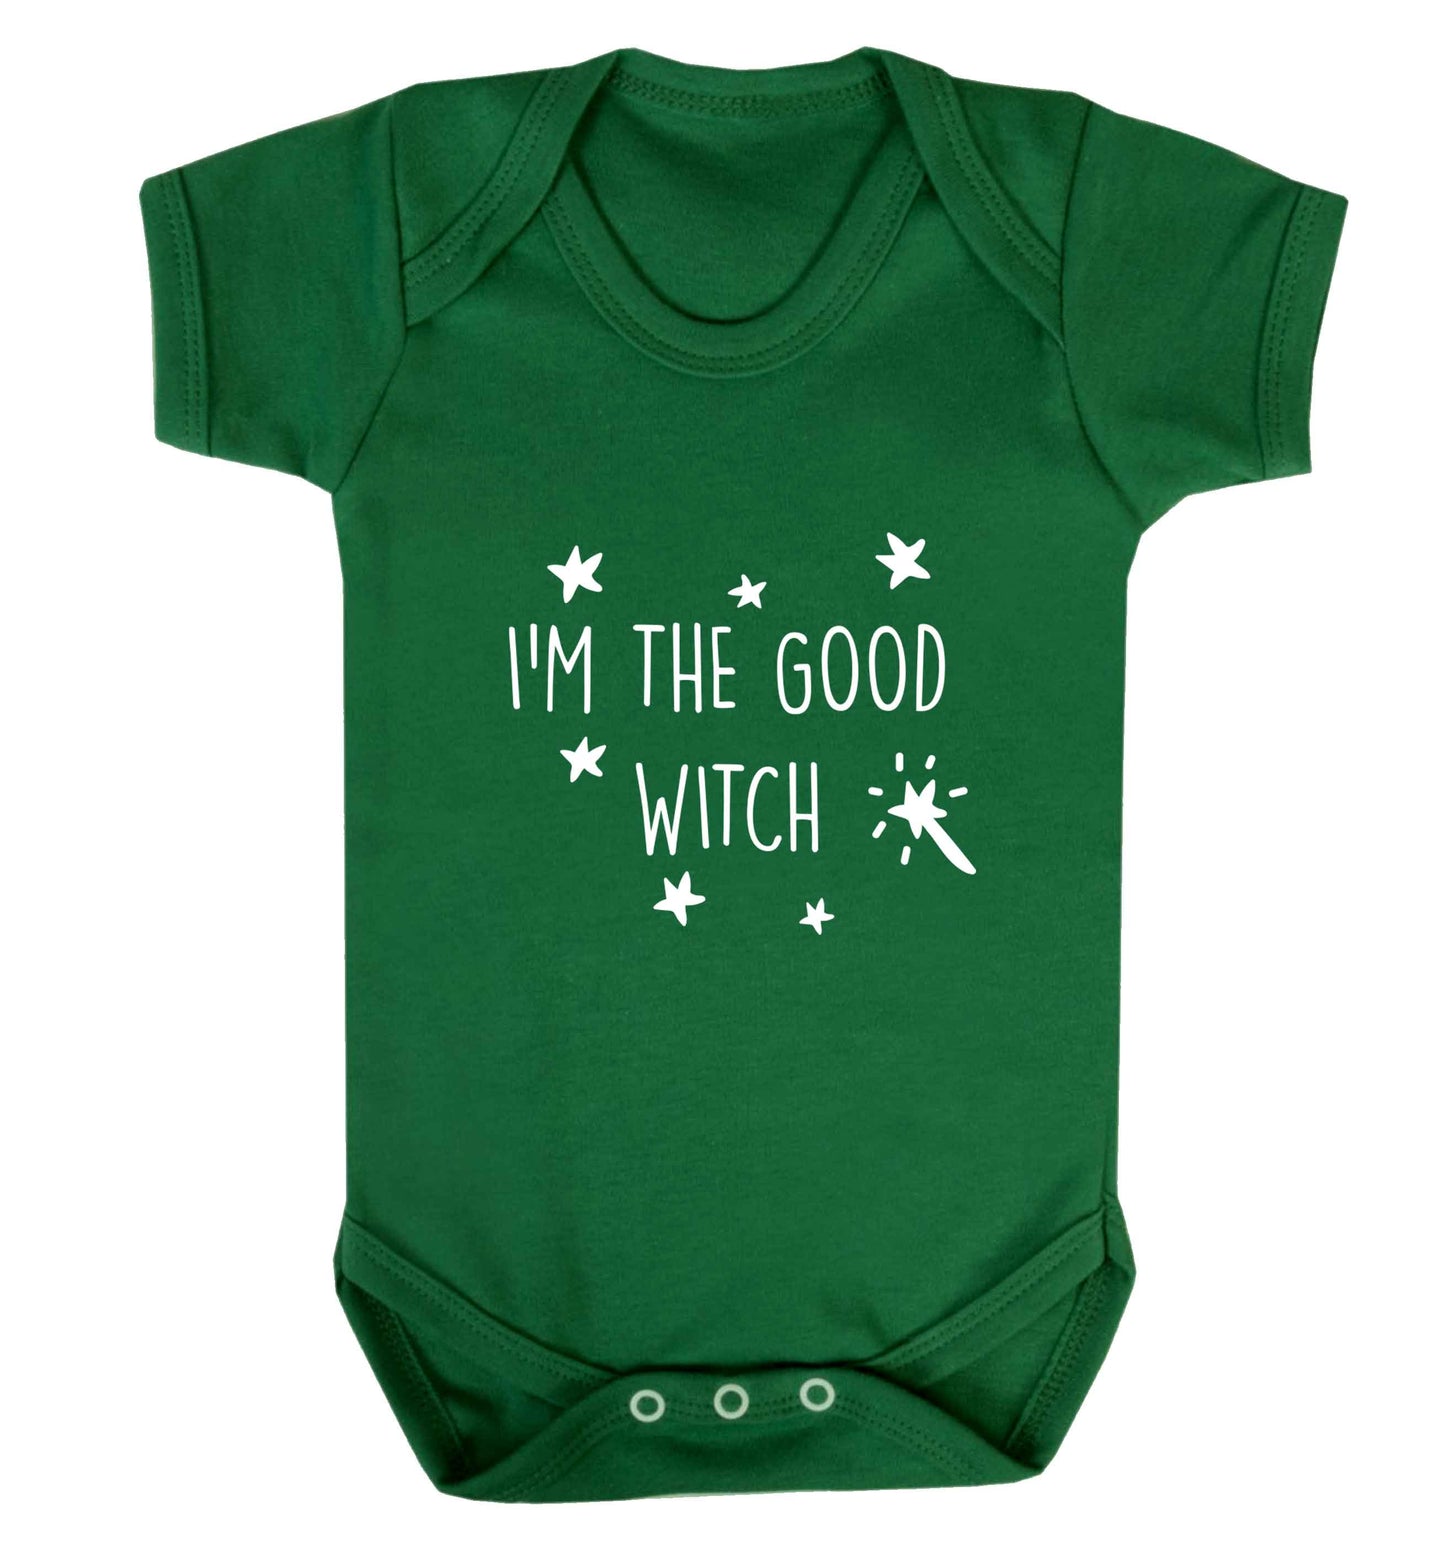 Good witch baby vest green 18-24 months